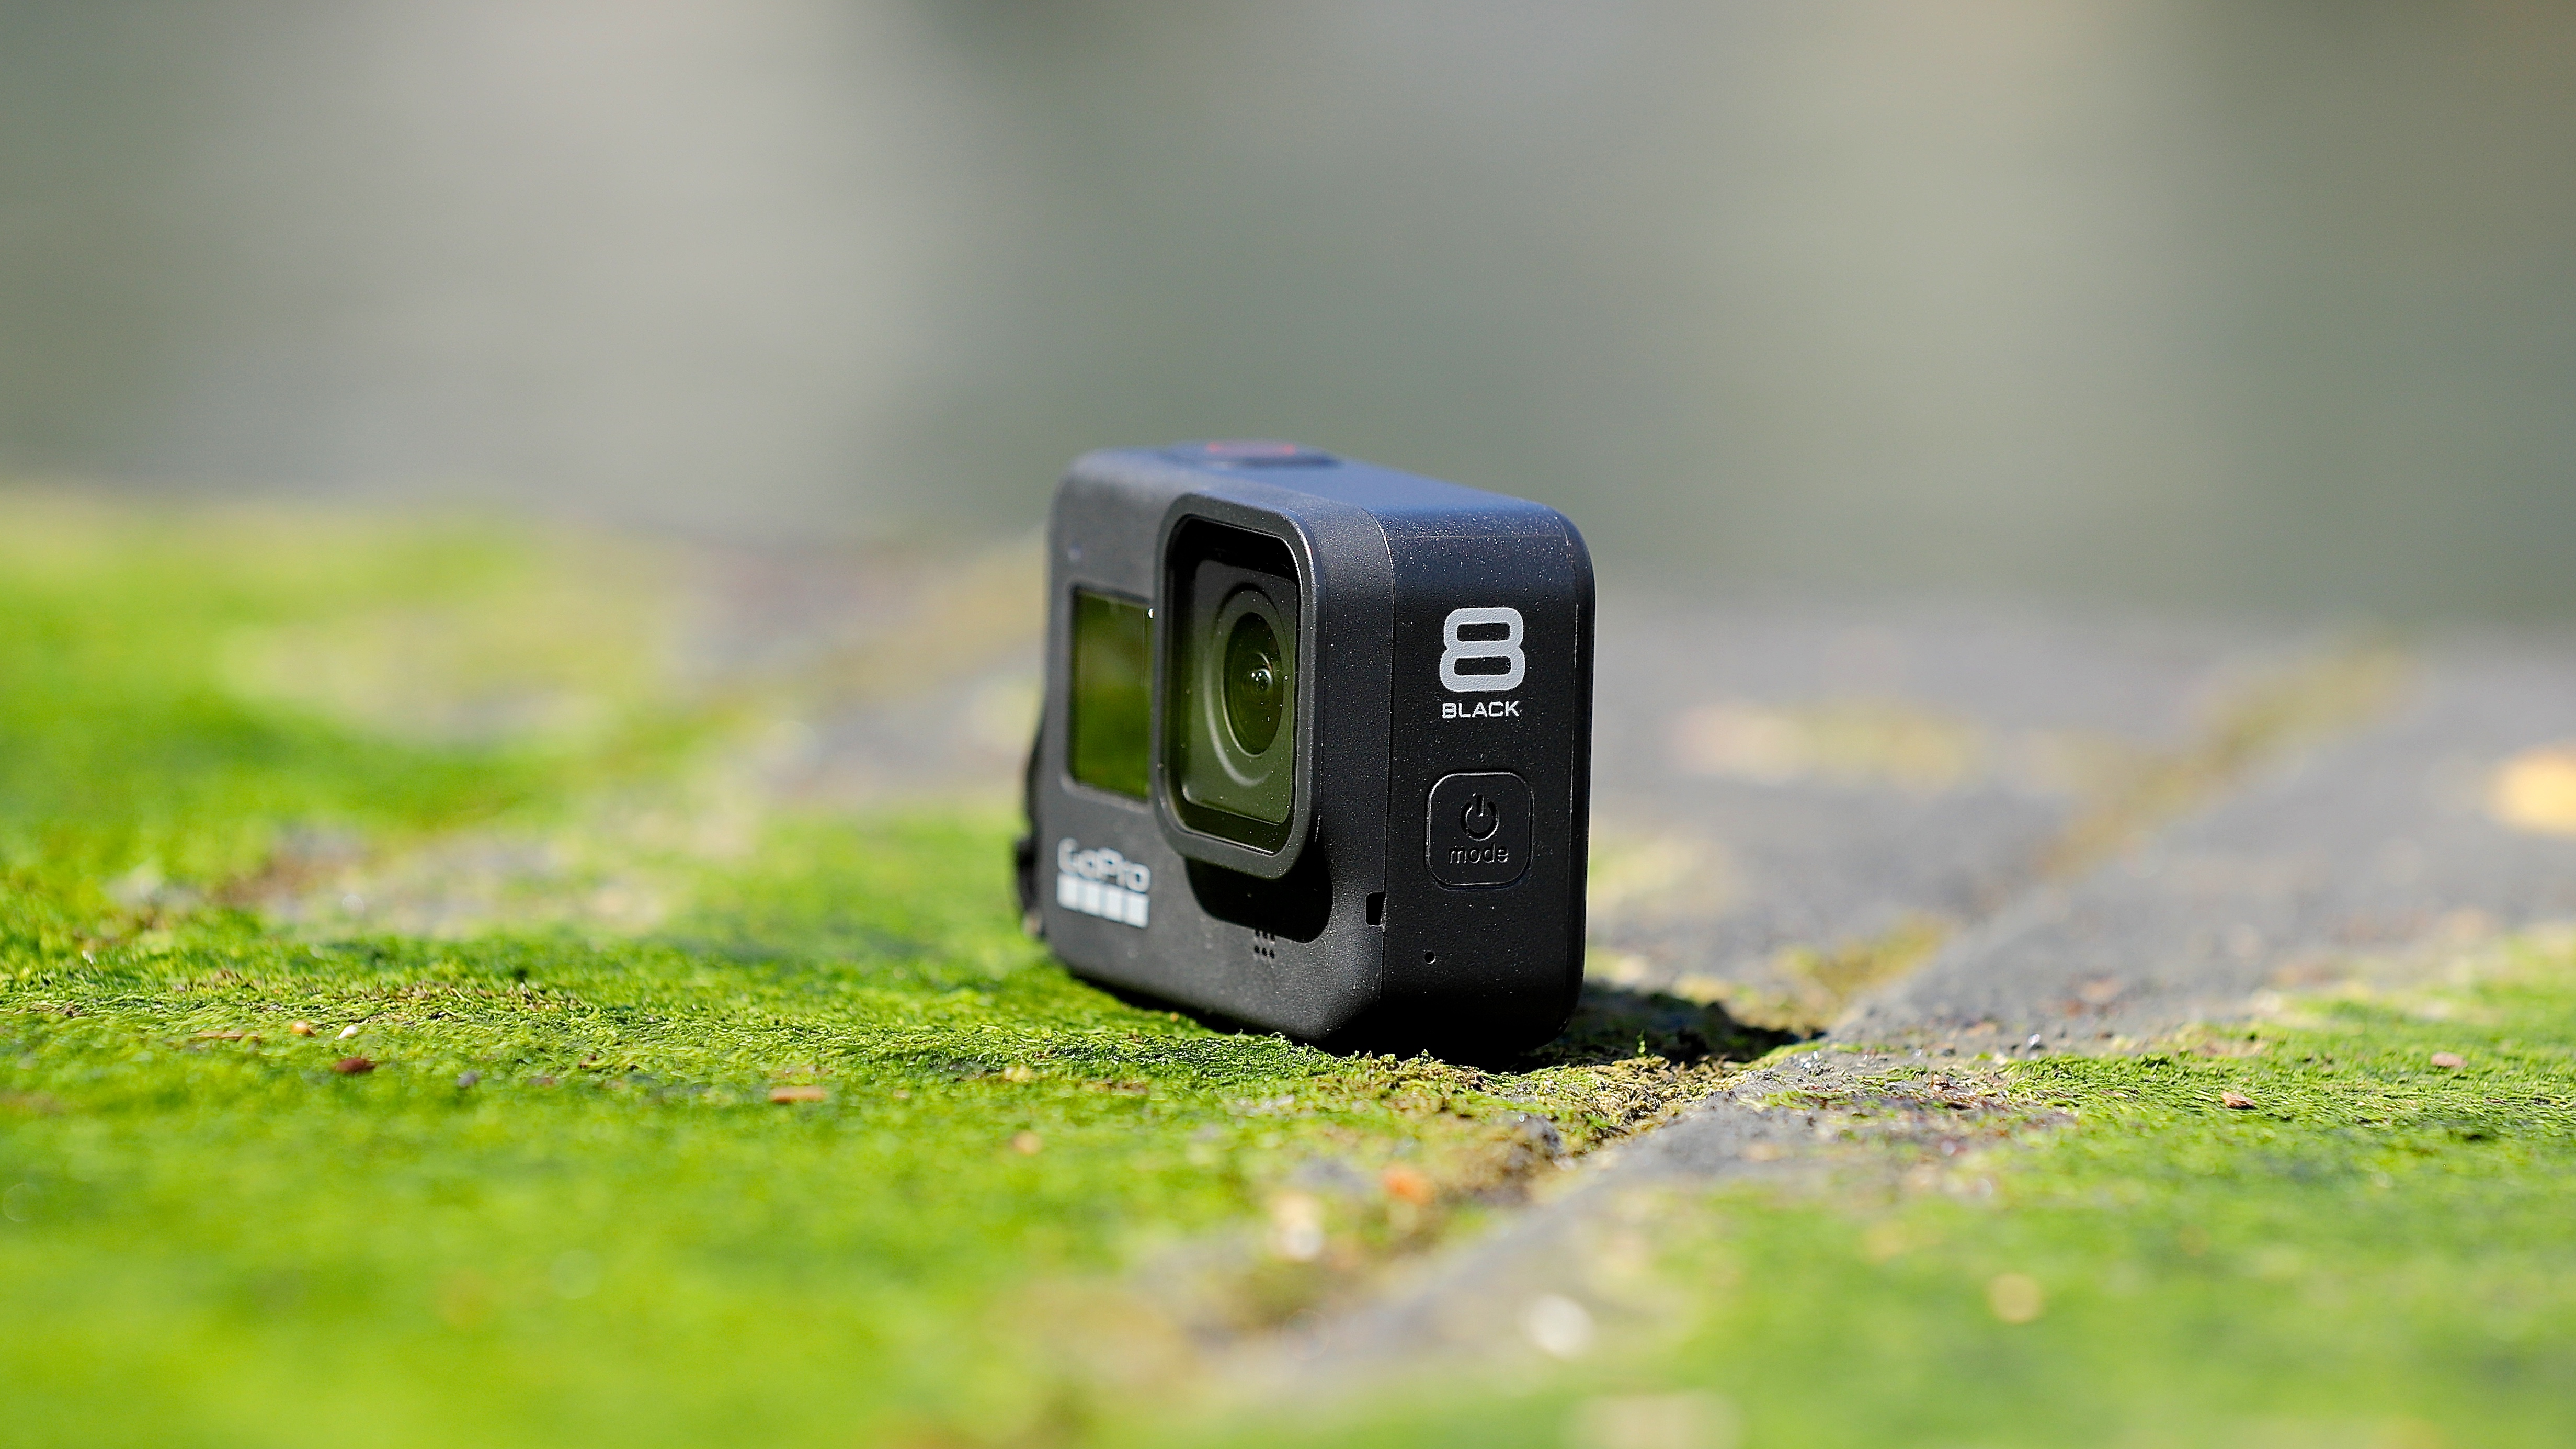 Best action camera 2020 the 10 top rugged cameras for video adventures